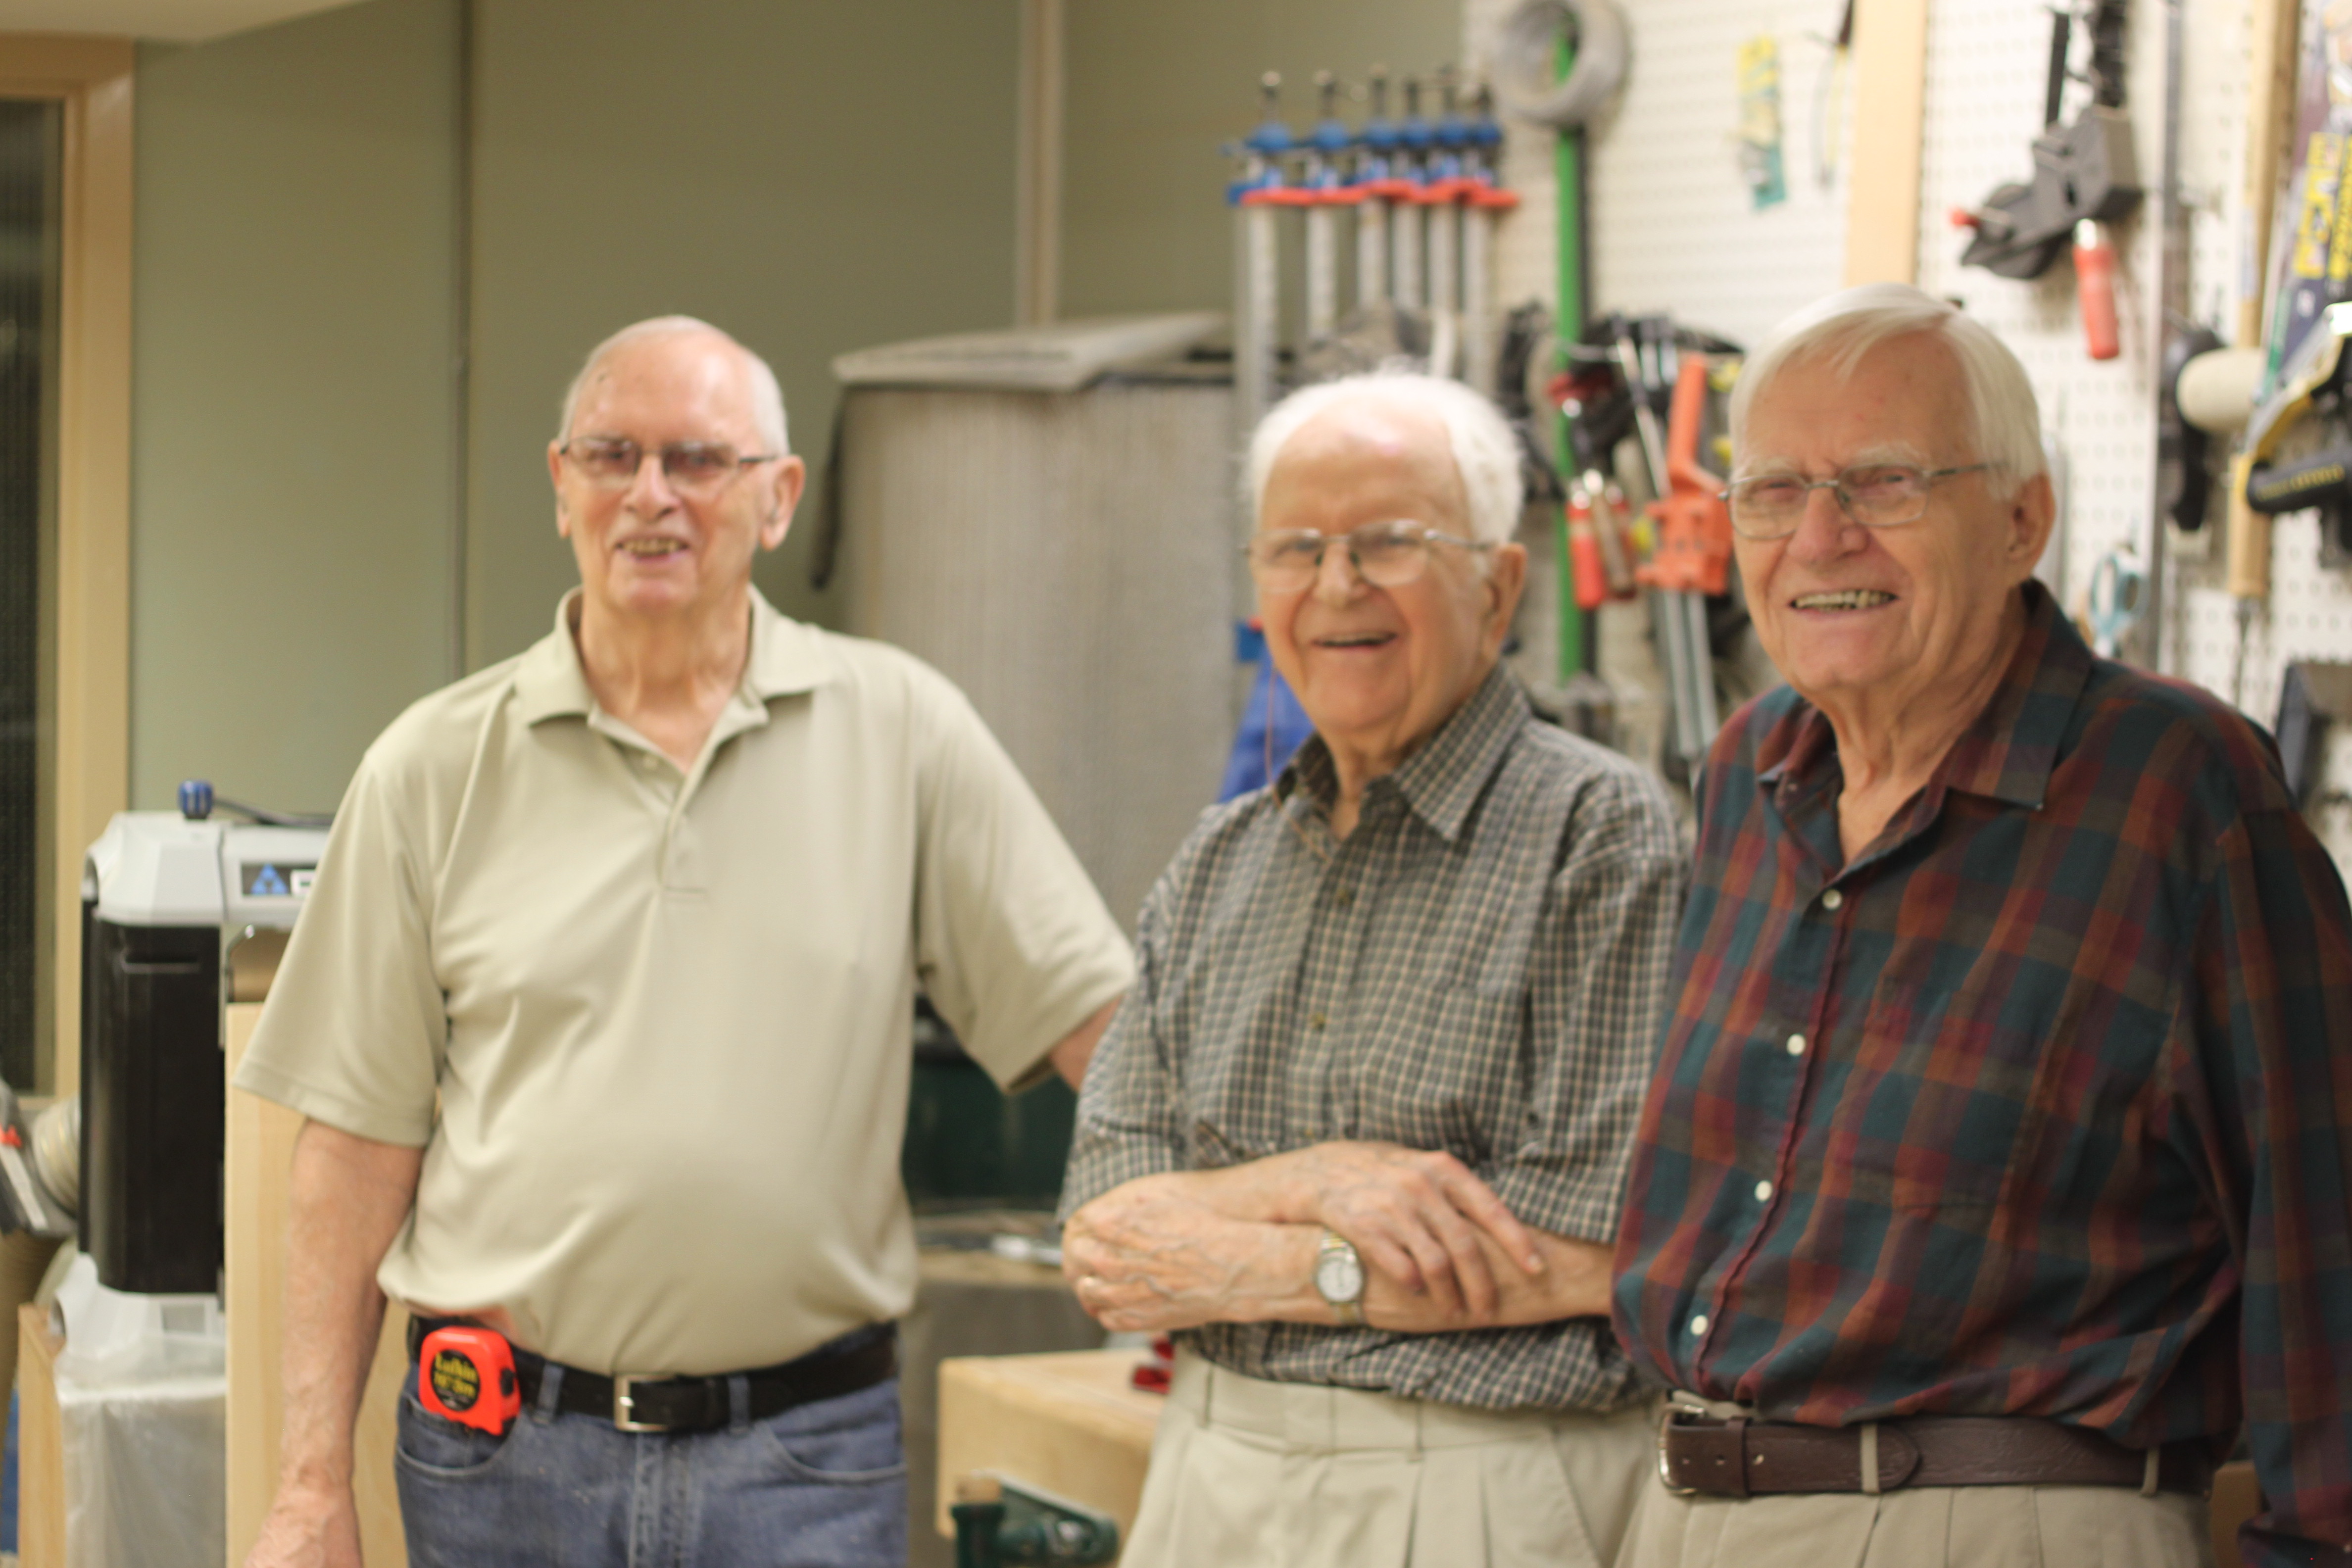 Bob, Cy and Harry say the social aspect of the woodshop at Tansley Woods is as important as any project they may work on.